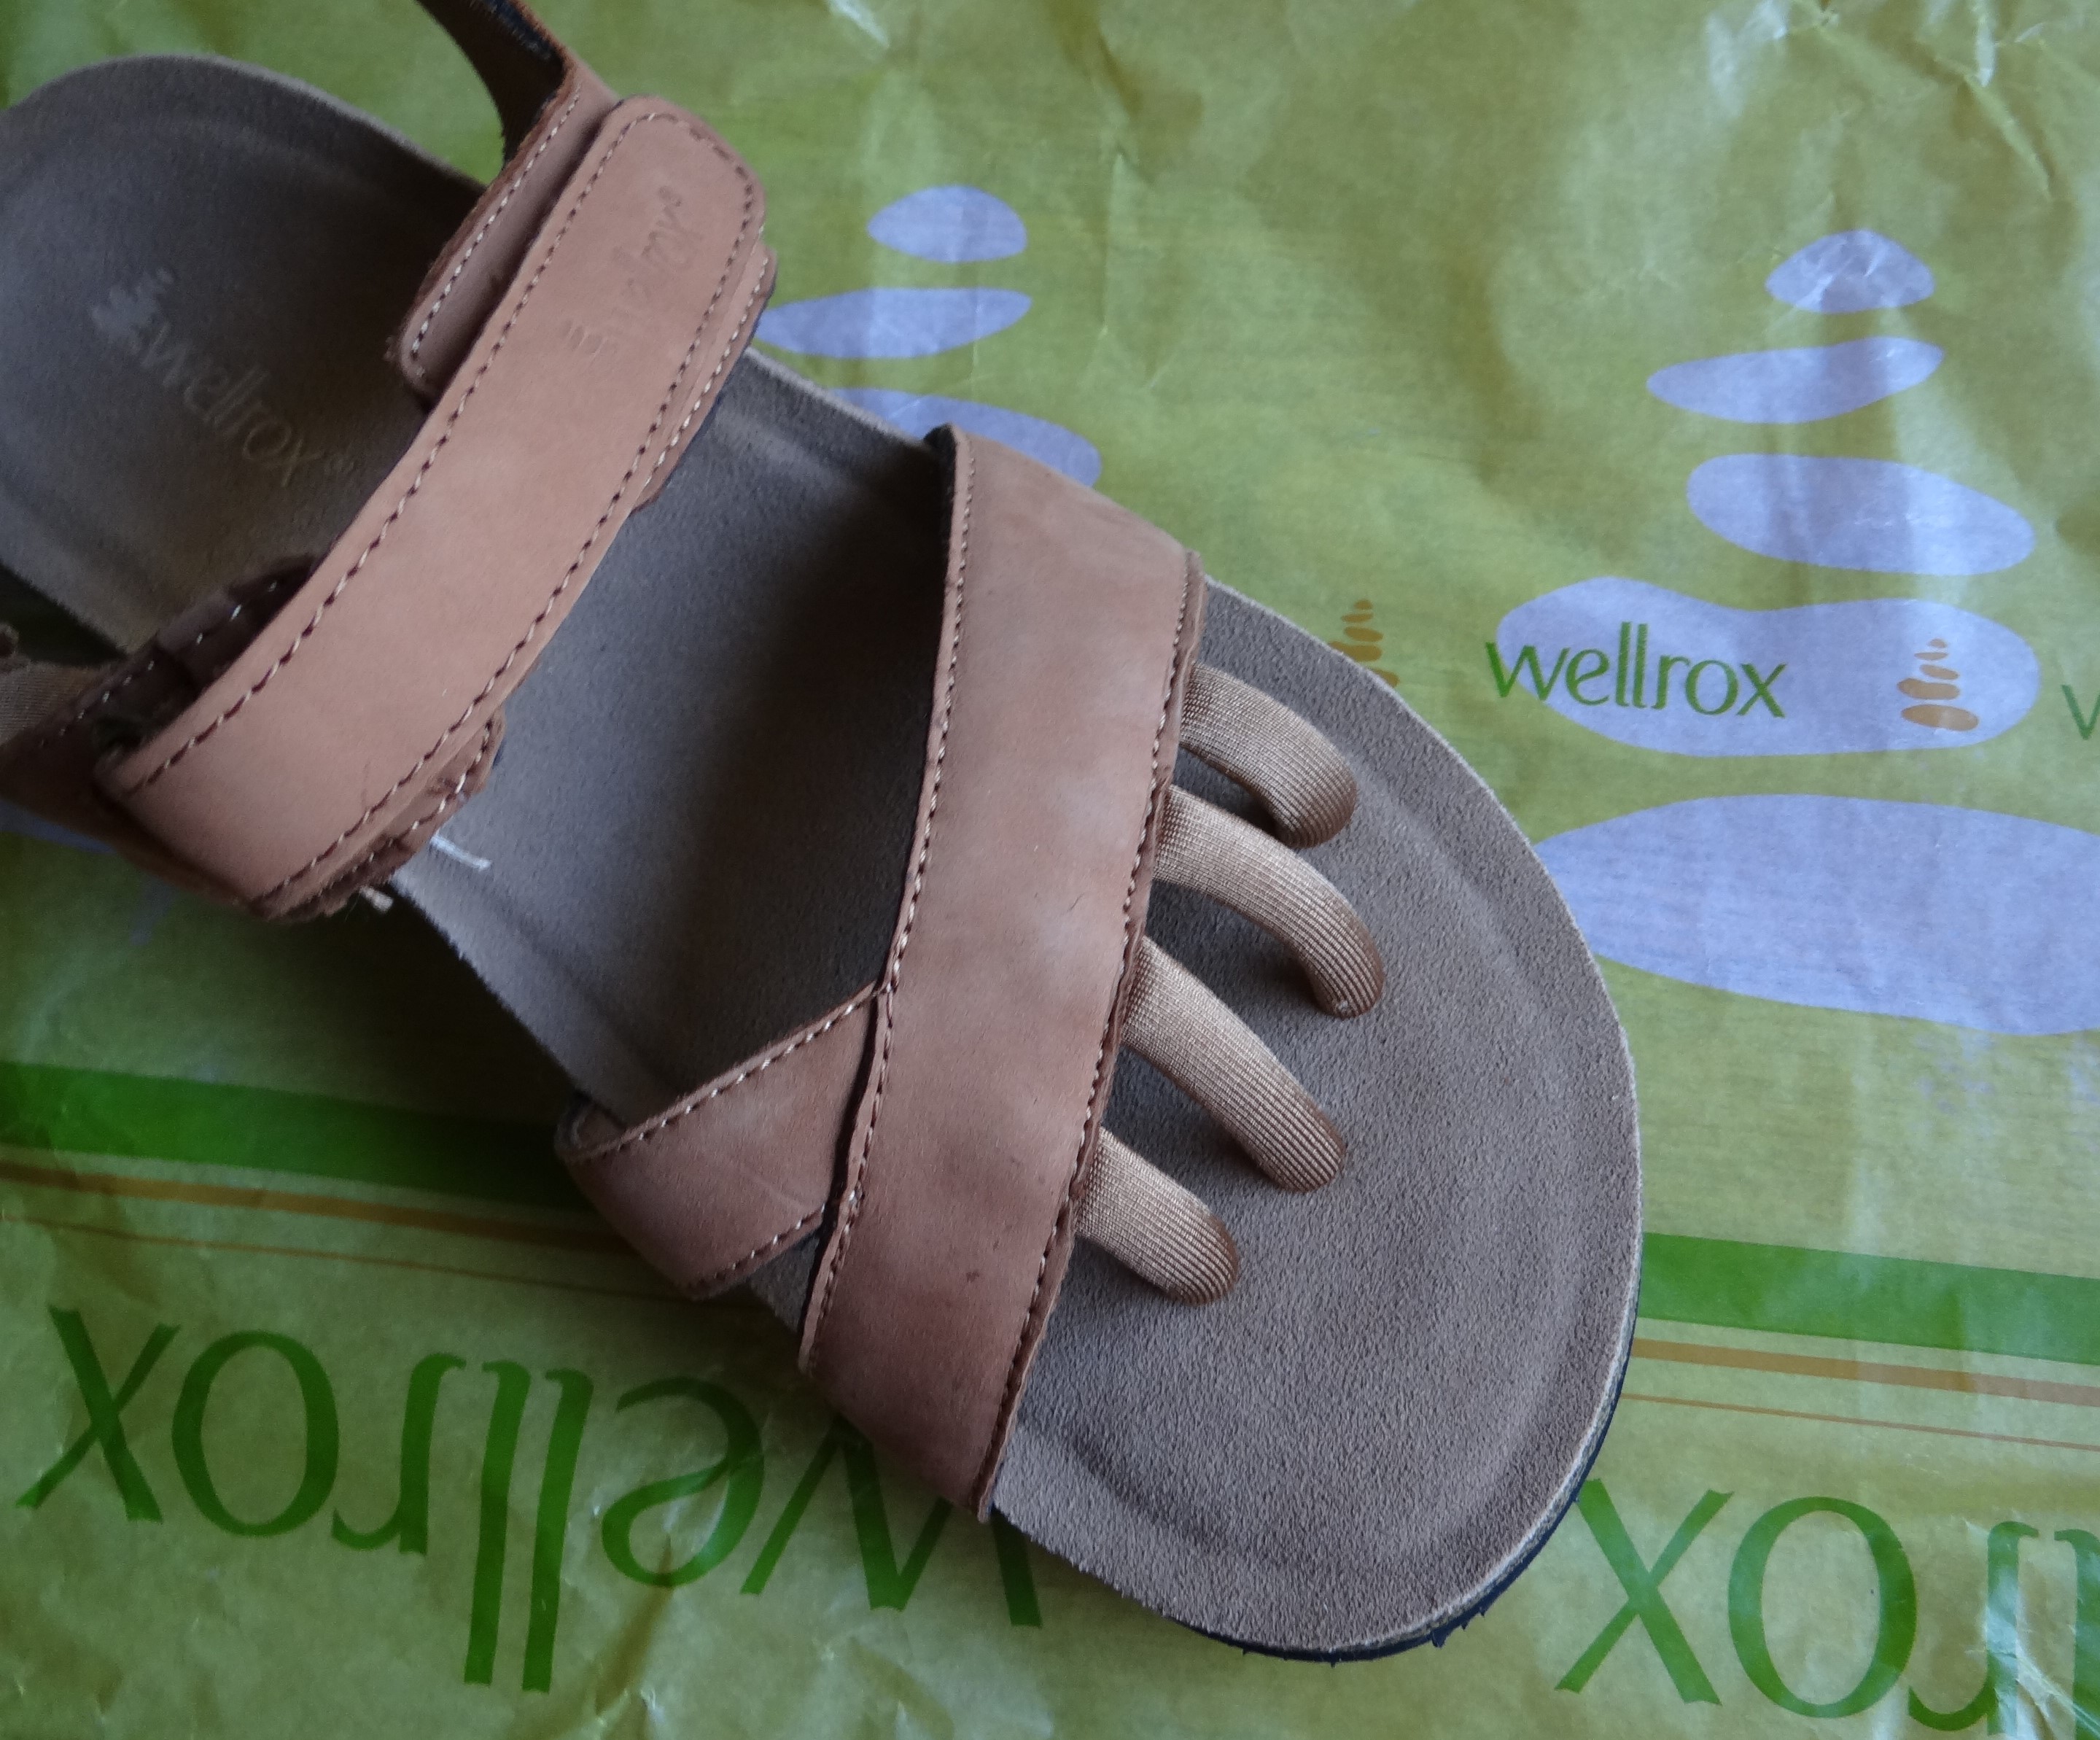 Wearing The Right Shoes? #Wellrox Rural Mom